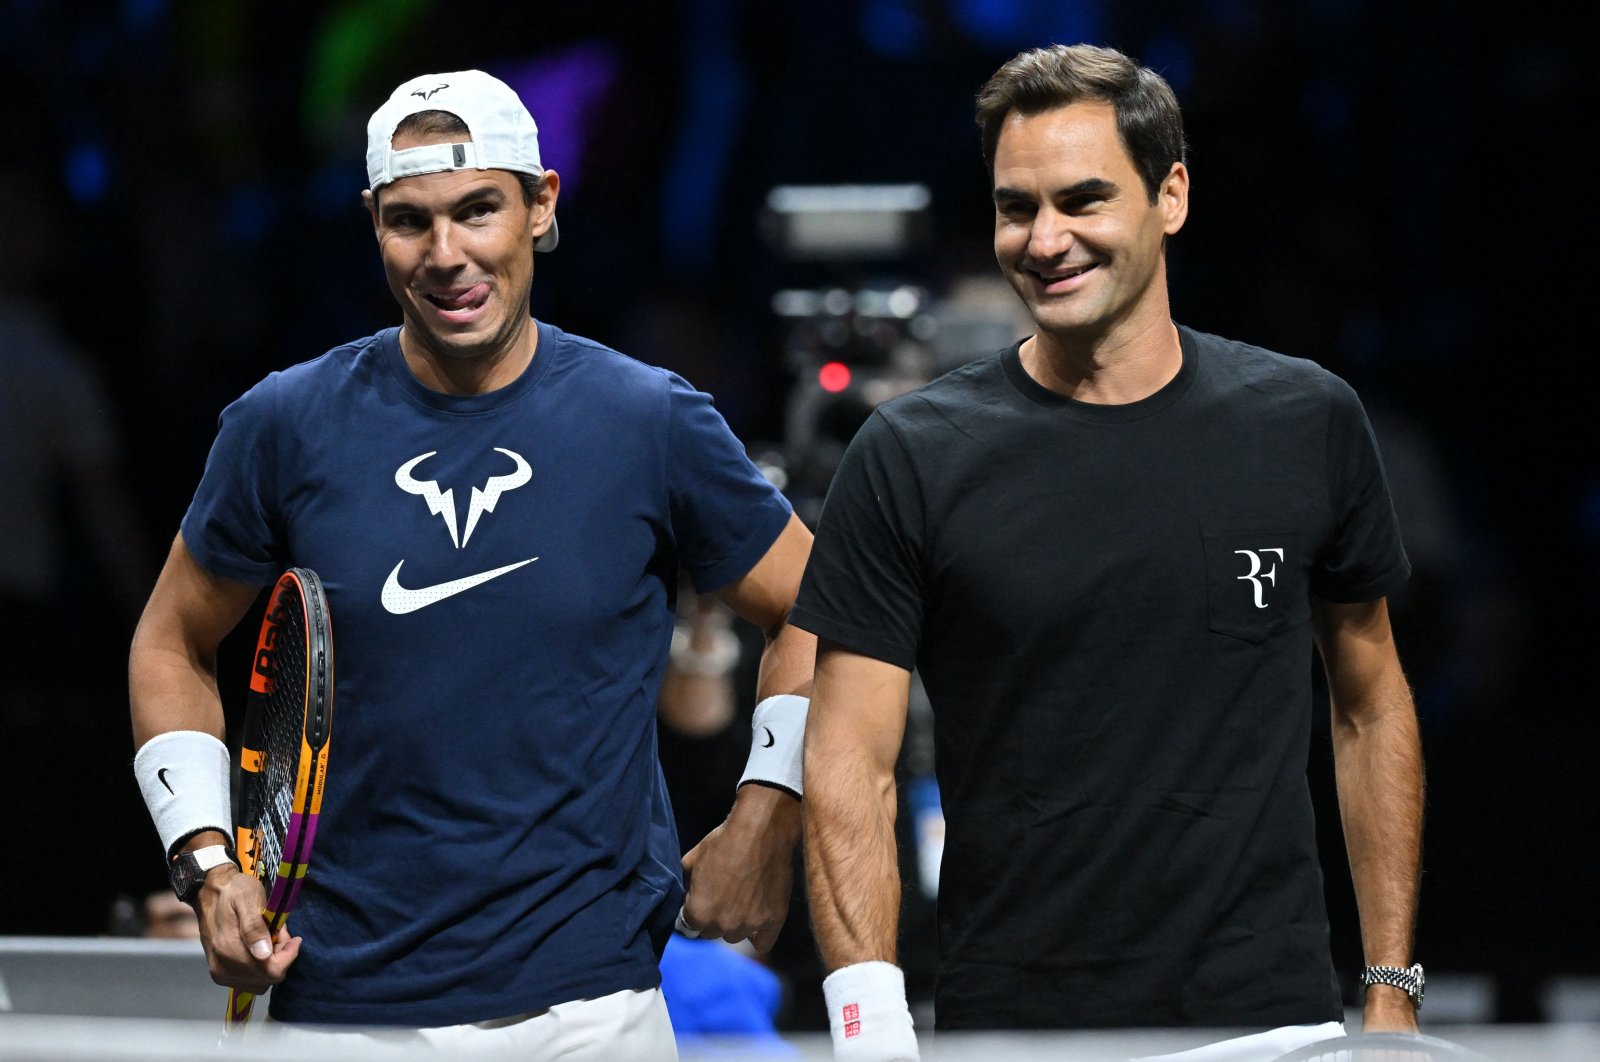 Roger Federer (R) and Rafael Nadal attend a practice session ahead of the 2022 Laver Cup, London, England, Sept. 22, 2022. (AFP Photo)